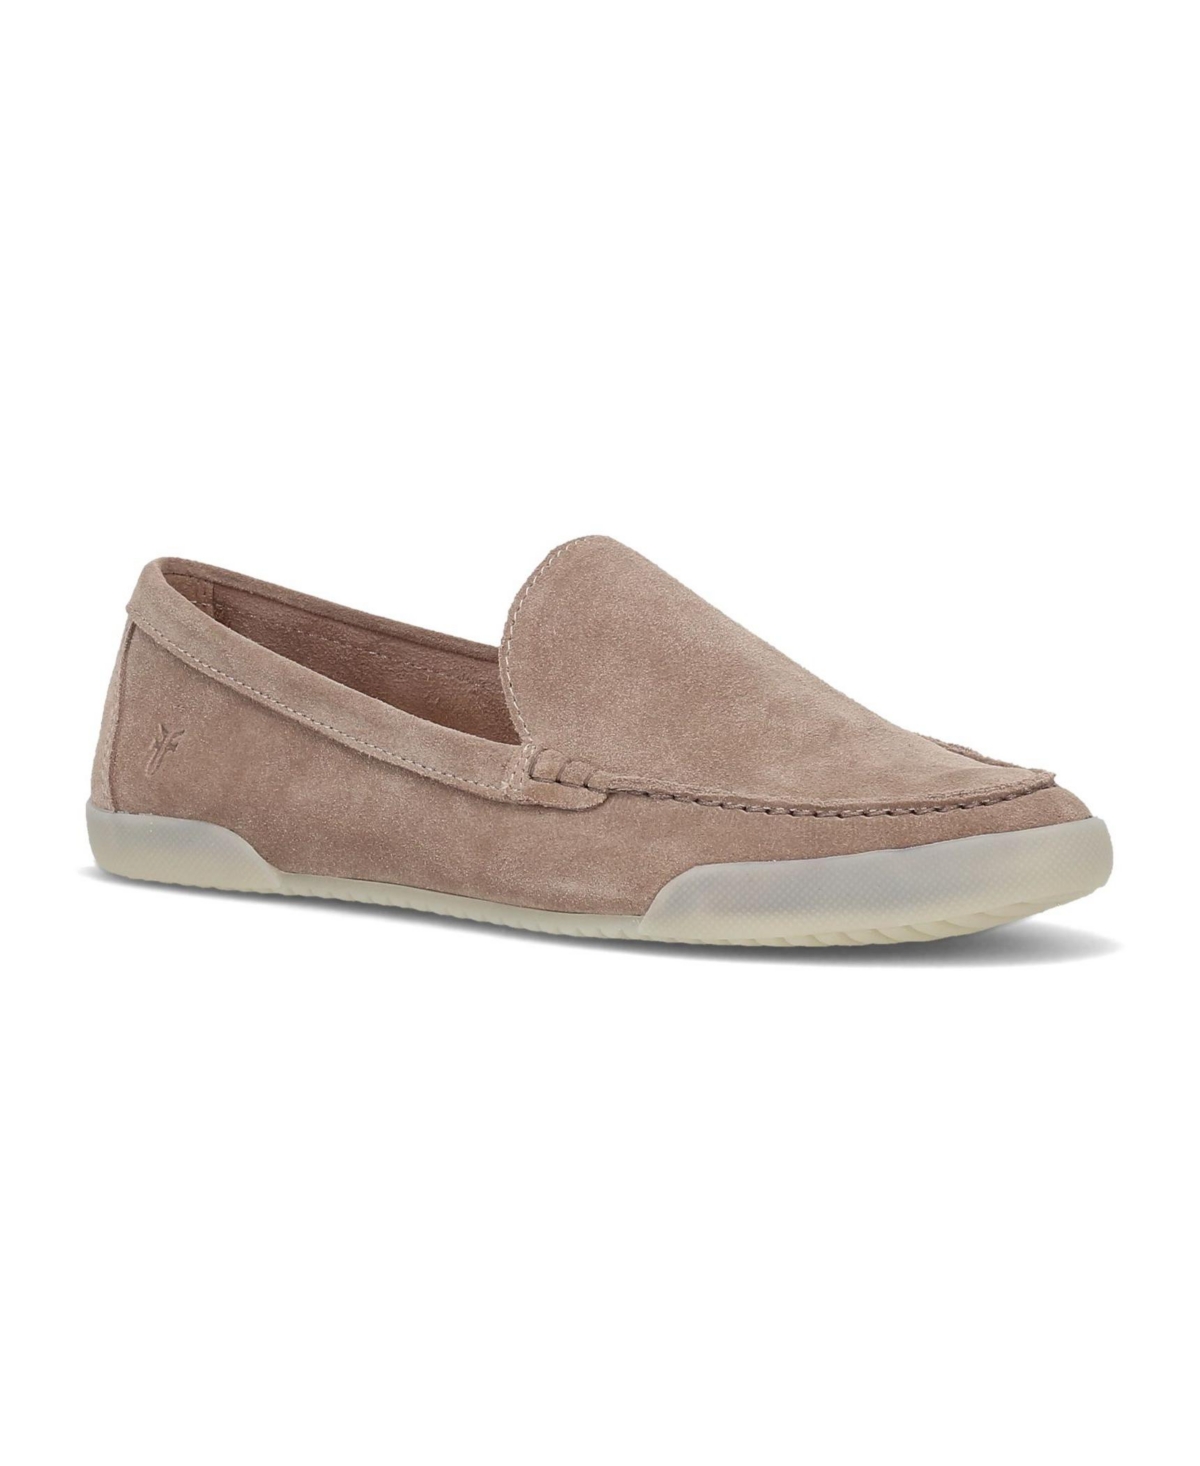 Women's Melanie Slip On Skimmer Suede Leather Loafers - Taupe